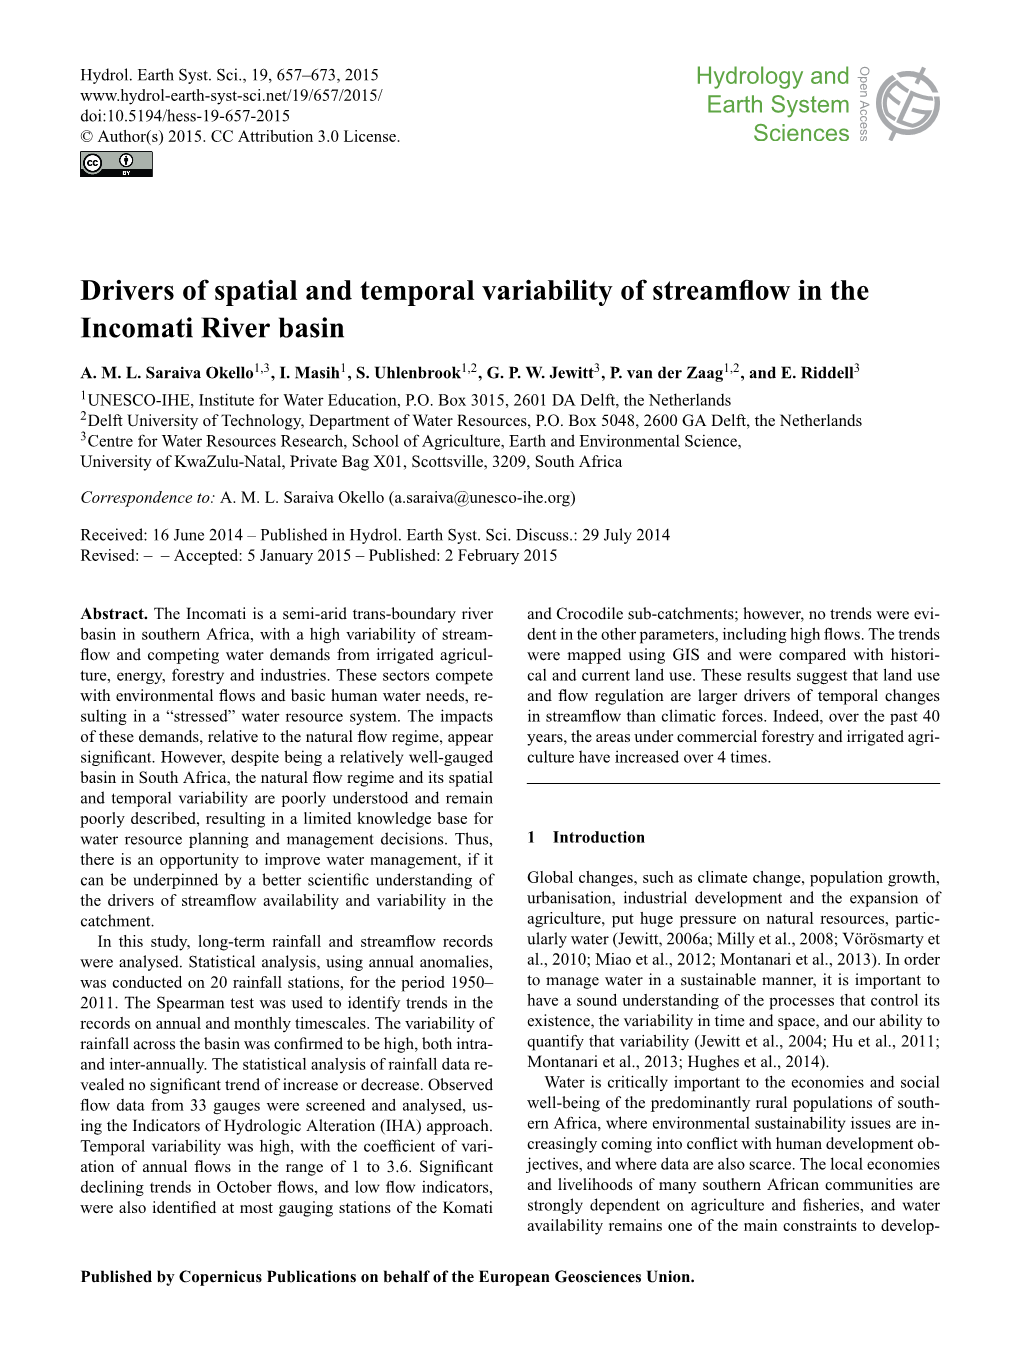 Drivers of Spatial and Temporal Variability of Streamflow In